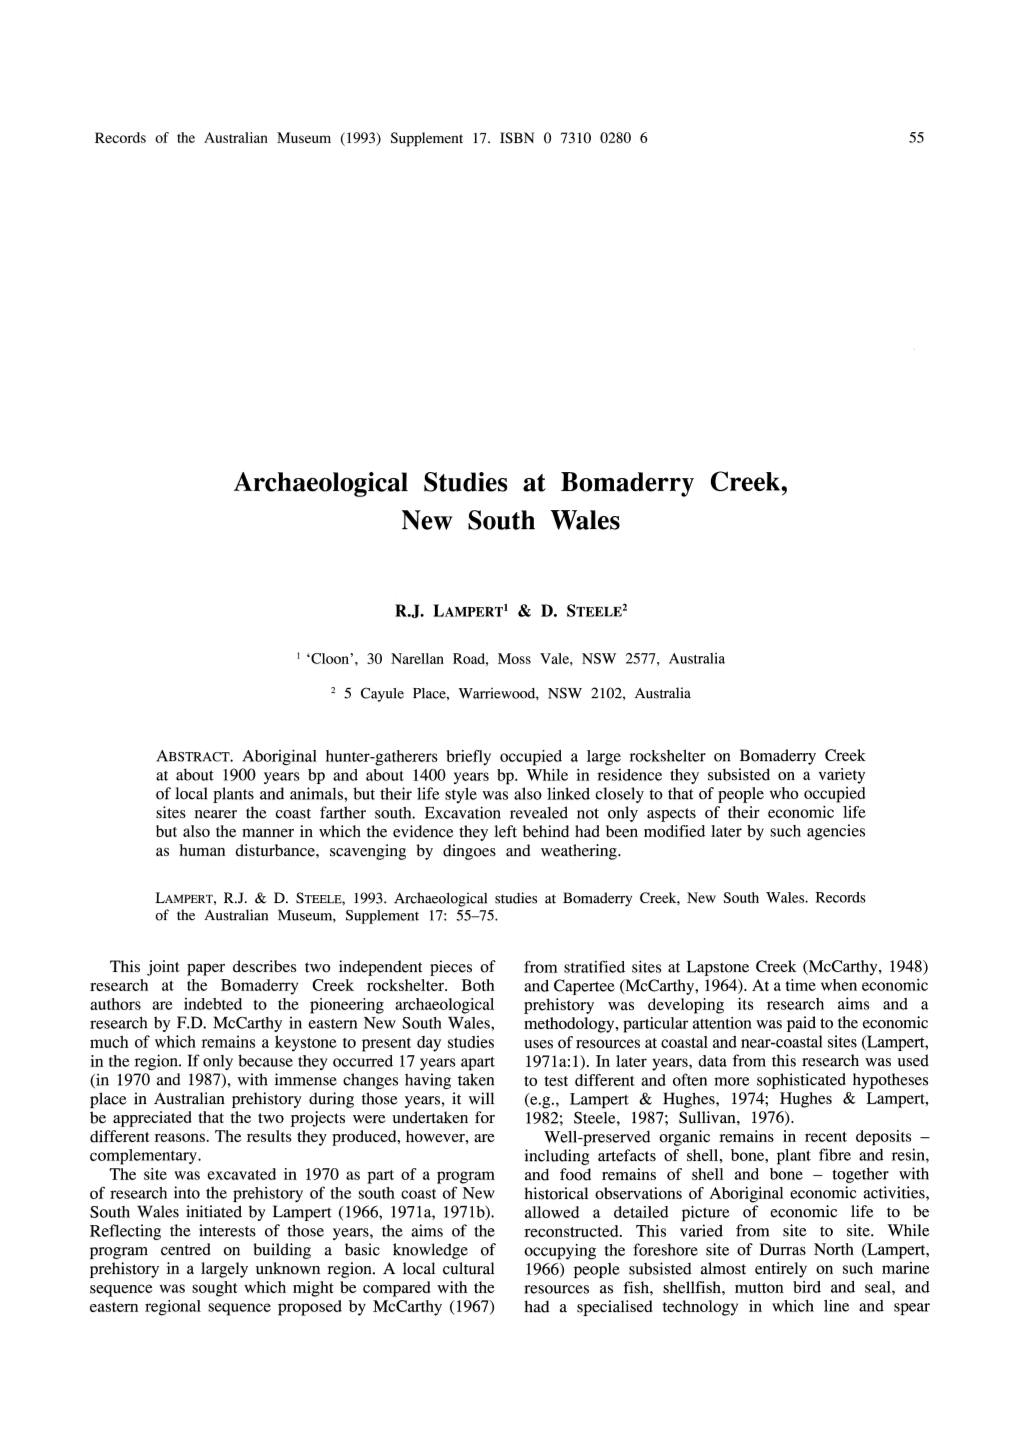 Archaeological Studies at Bomaderry Creek, New South Wales